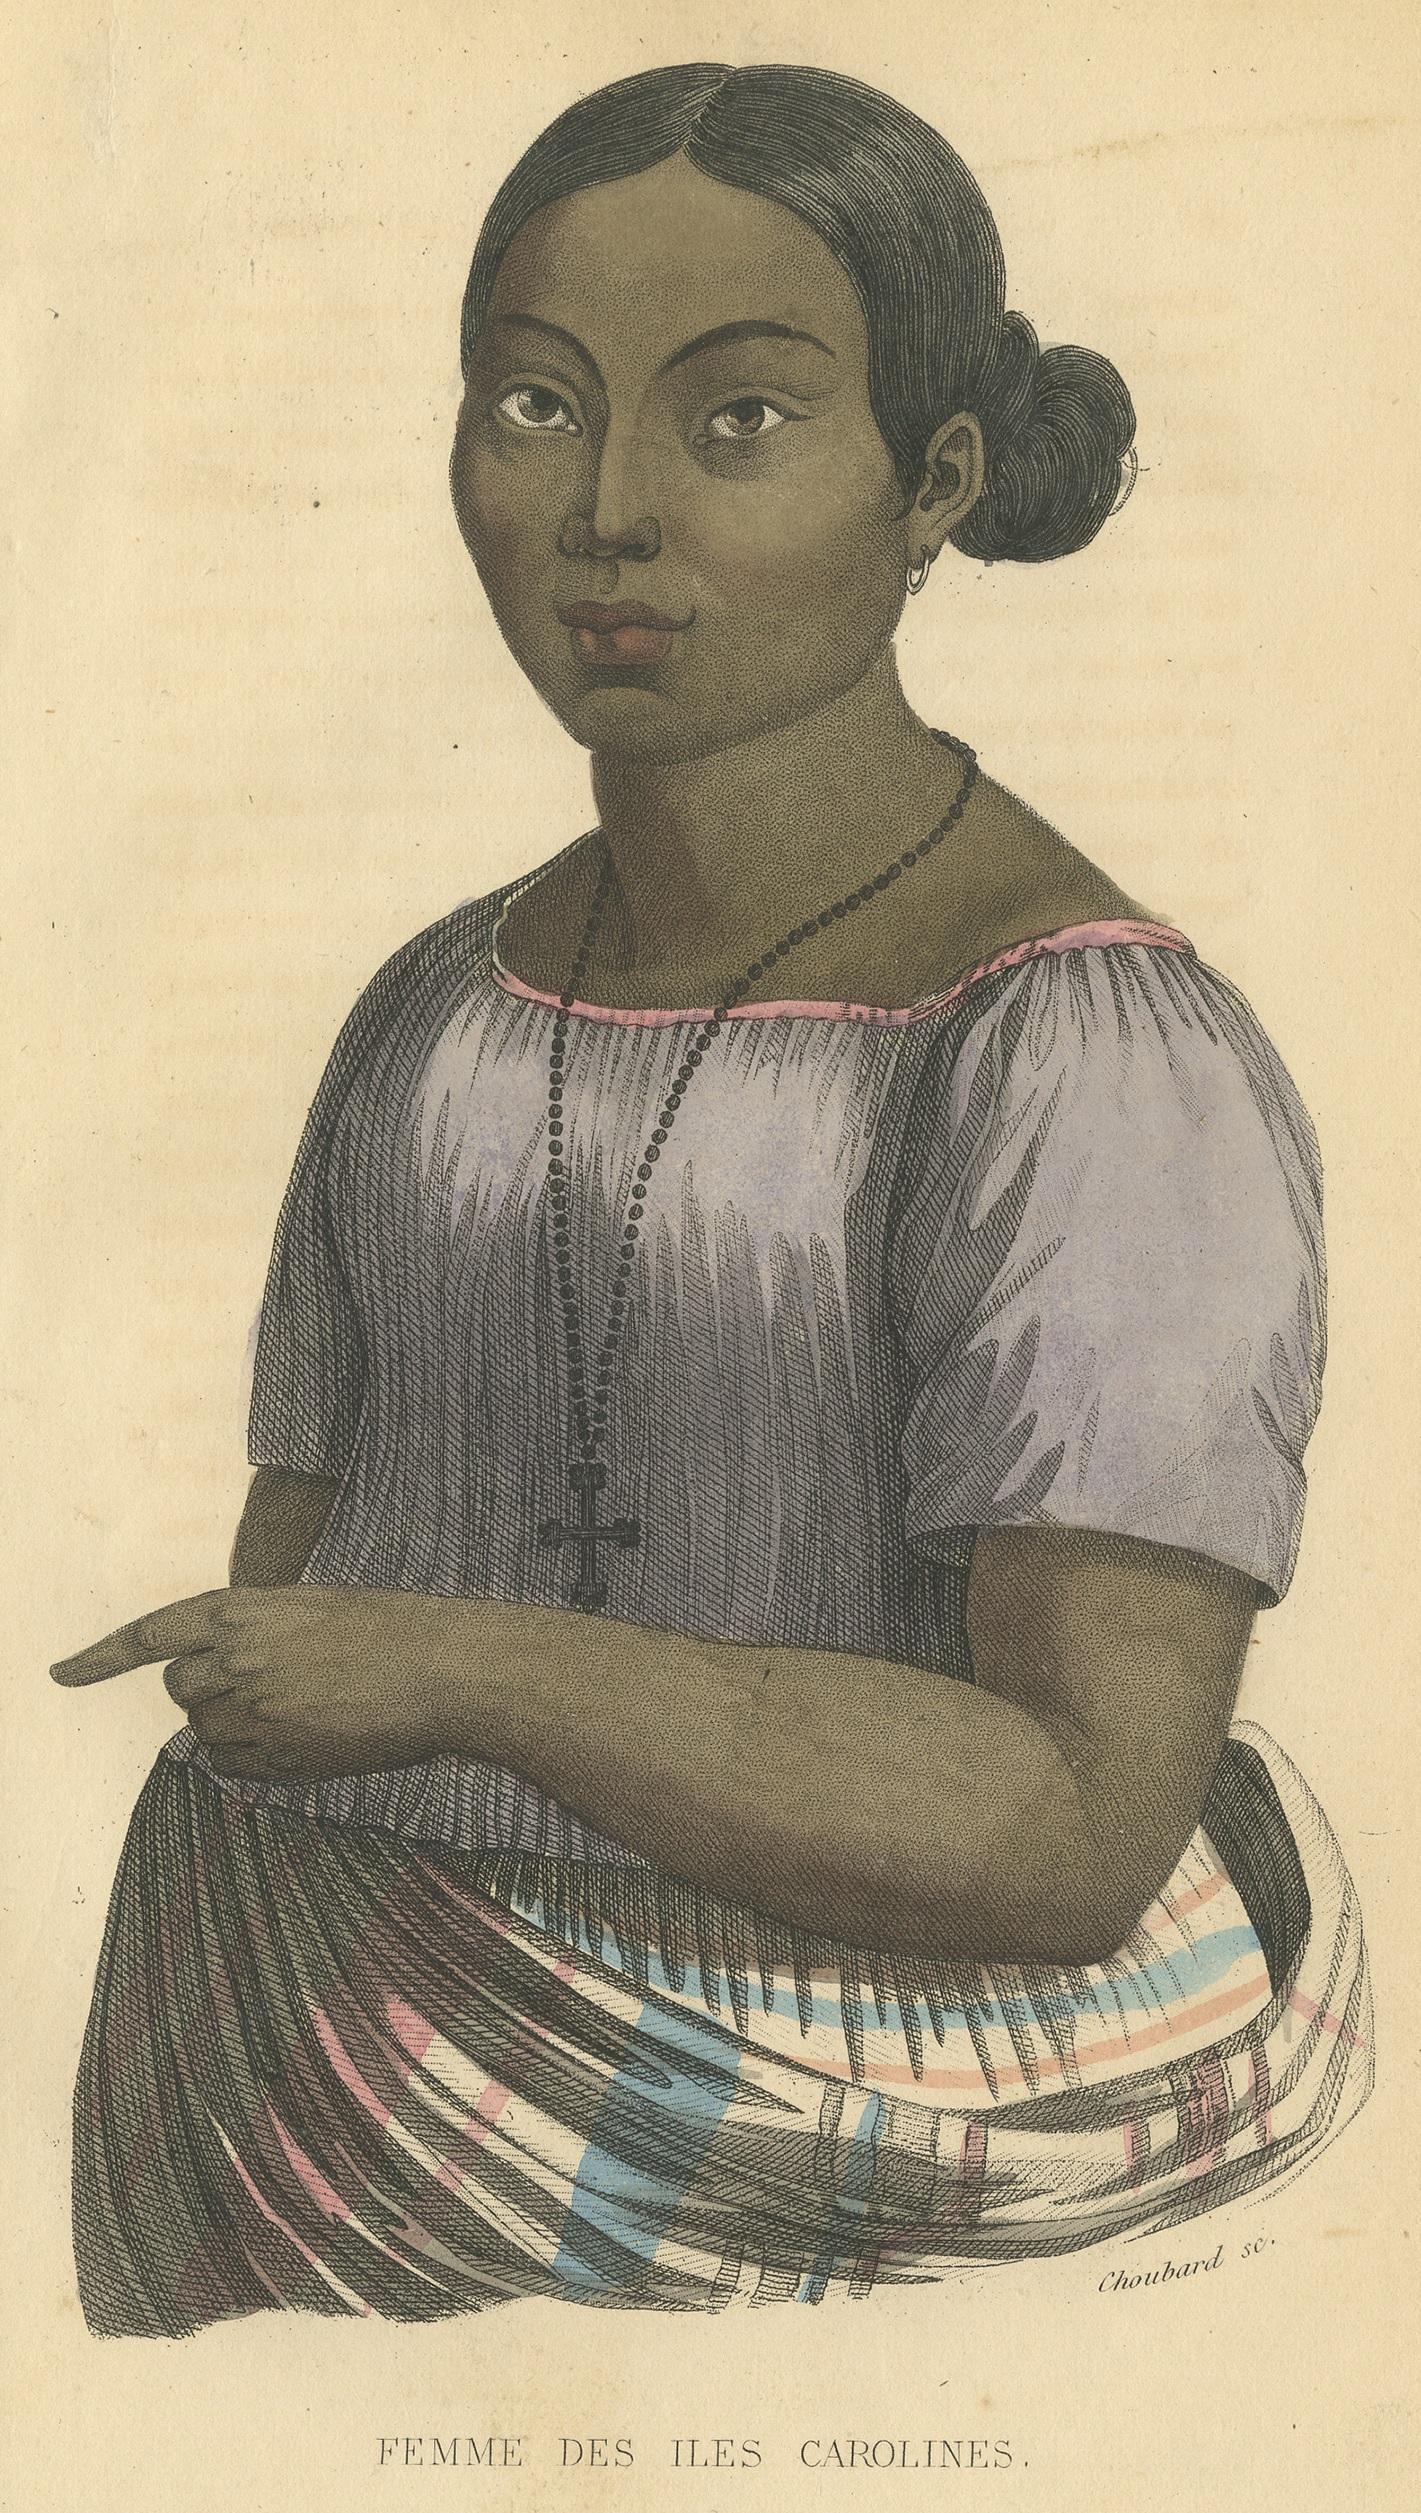 19th Century Antique Print of a Female of the Caroline Islands by Prichard, 1843